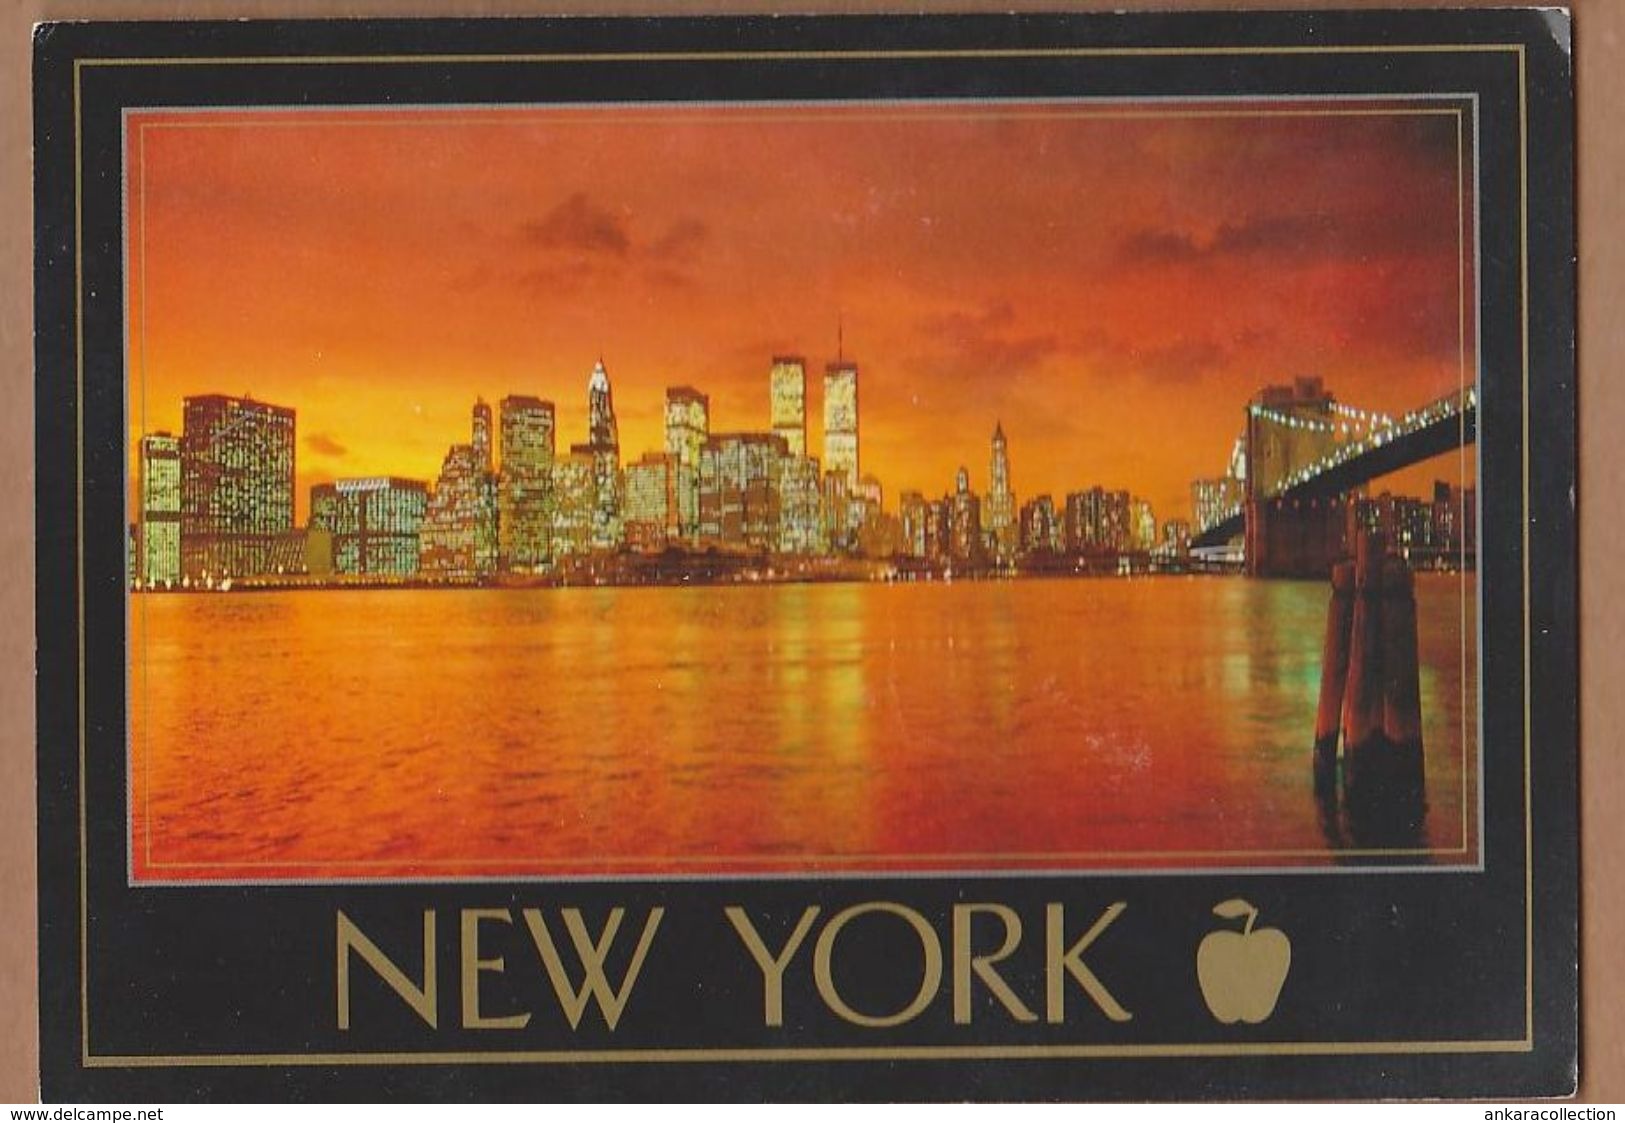 AC - NEW YORK CITY IN THE SUN UNITED STATES OF AMERICA CARTE POSTALE  POST CARD - Multi-vues, Vues Panoramiques